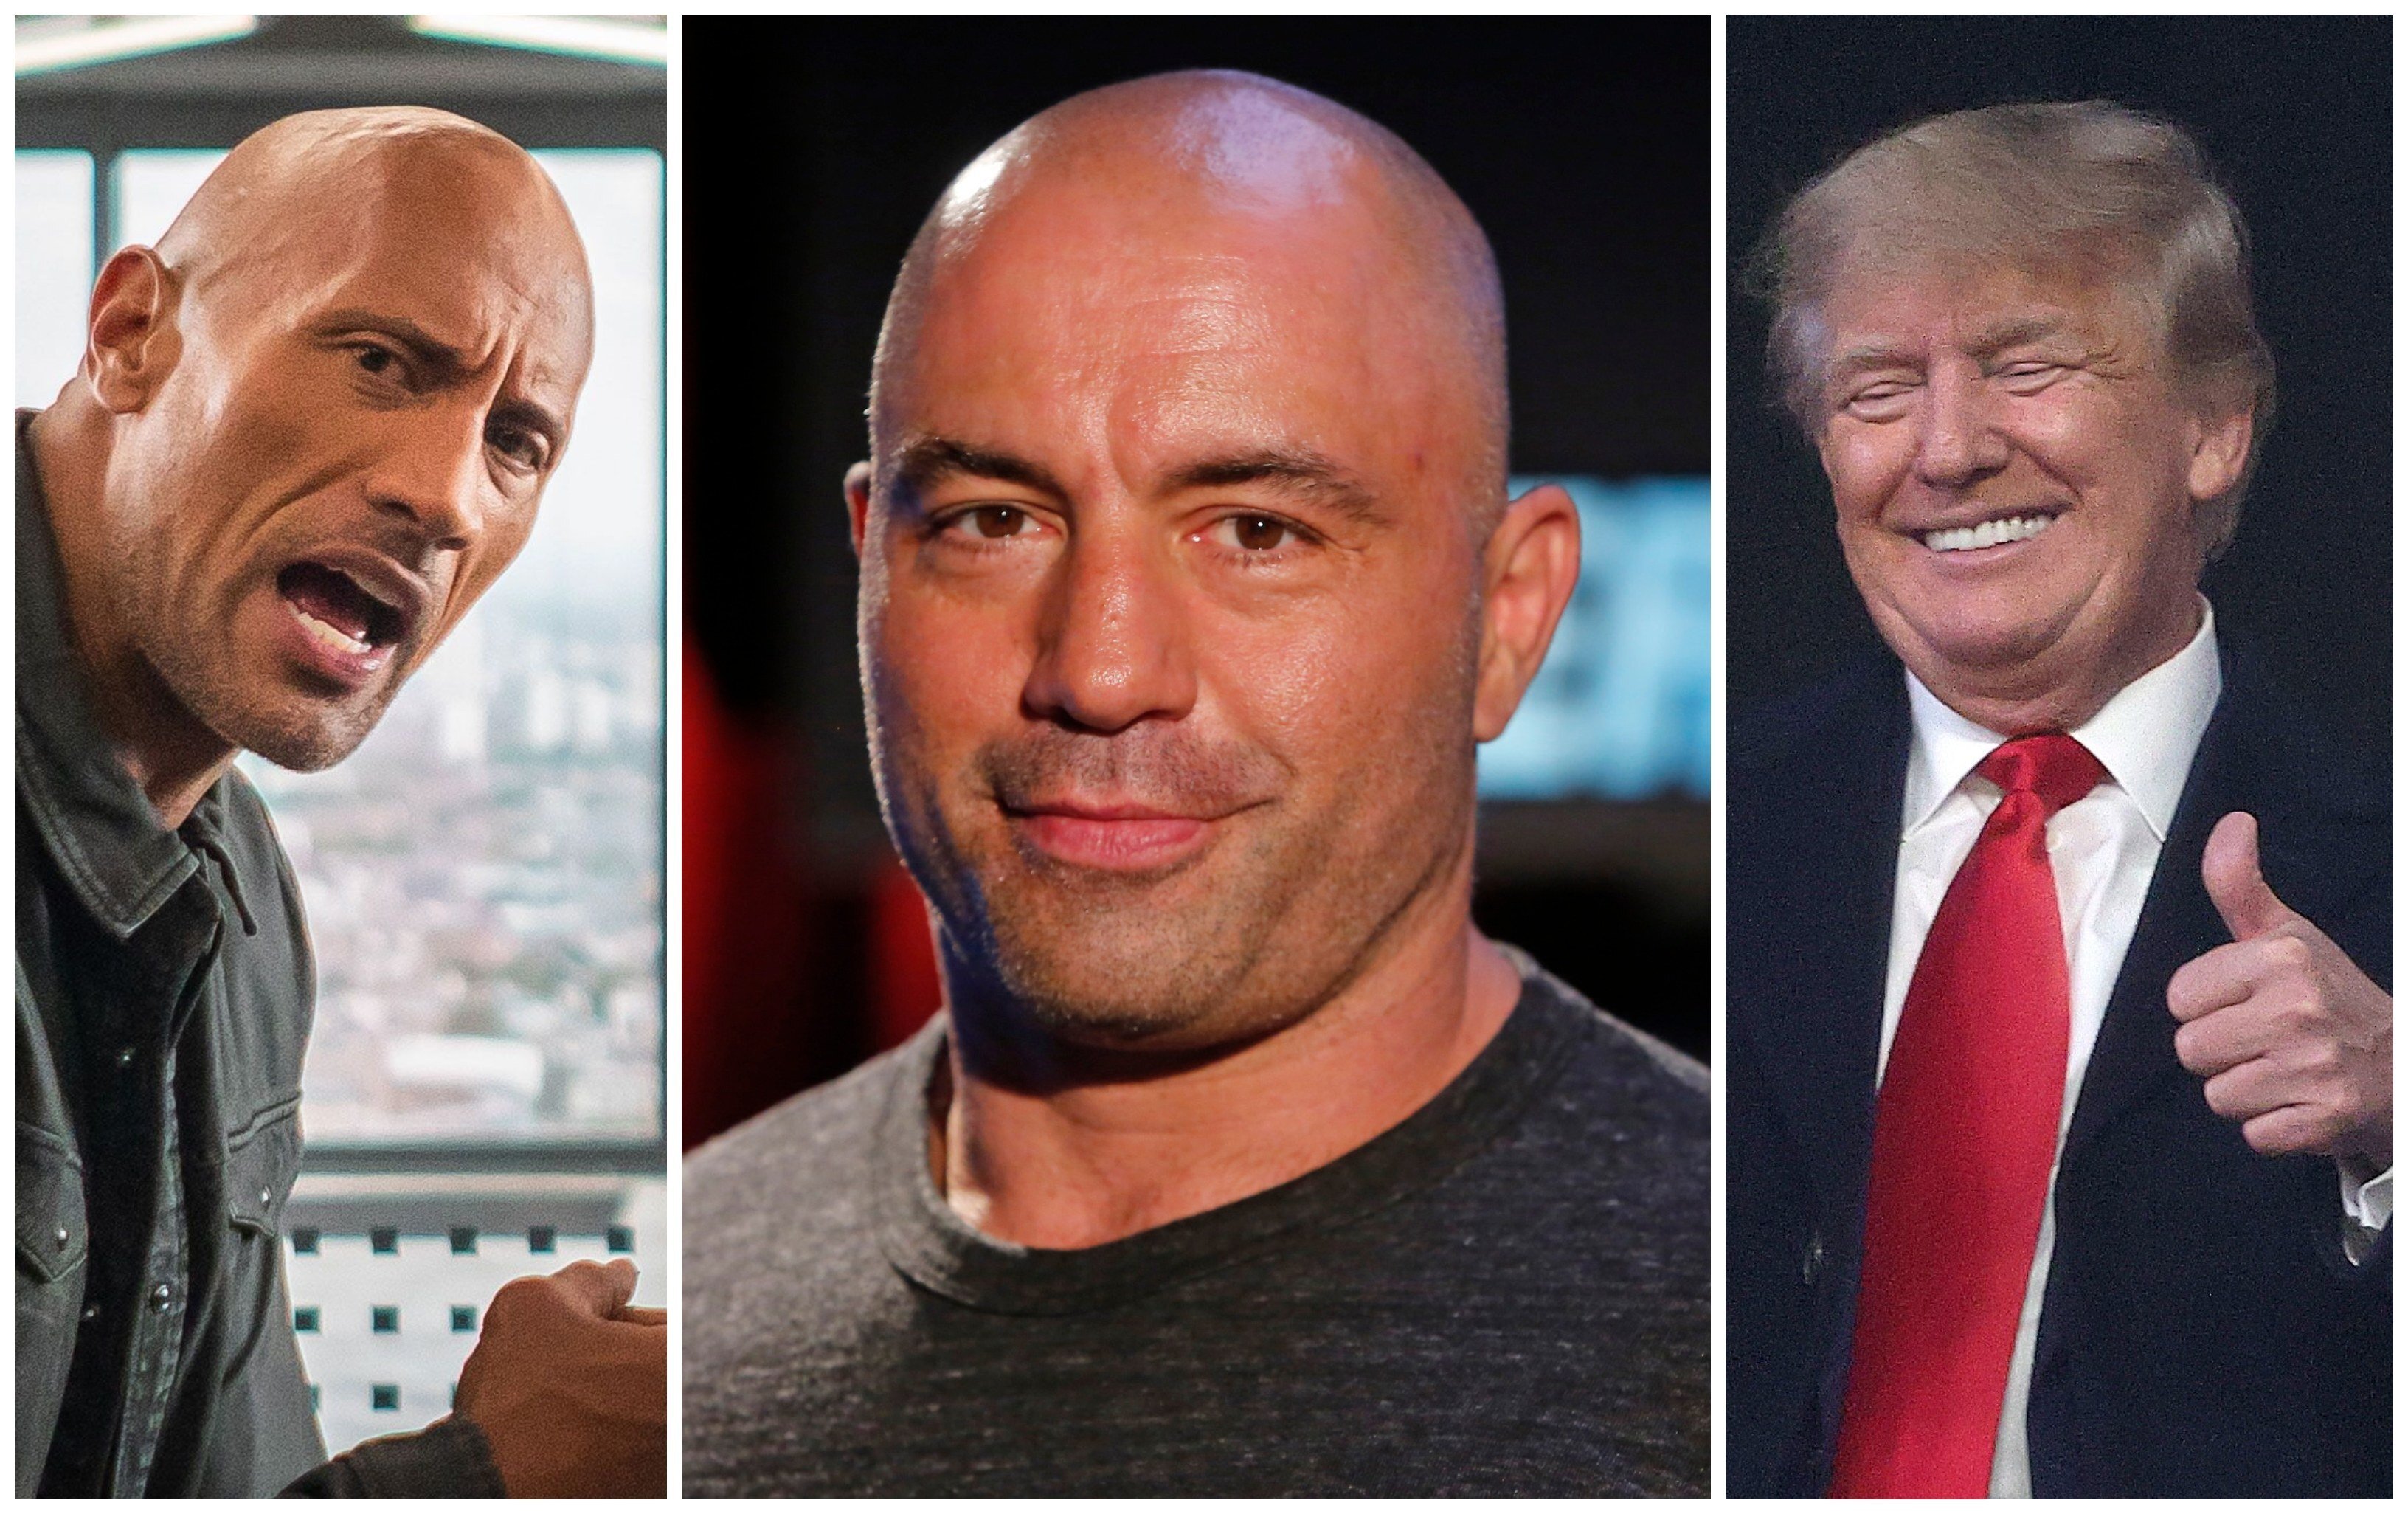 Joe Rogan apologised for past use of the N-word on his wildly popular podcast and everyone from Dwayne “The Rock” Johnson to Donald Trump weighed in with their reactions. Photos: Getty, AFP, Handout